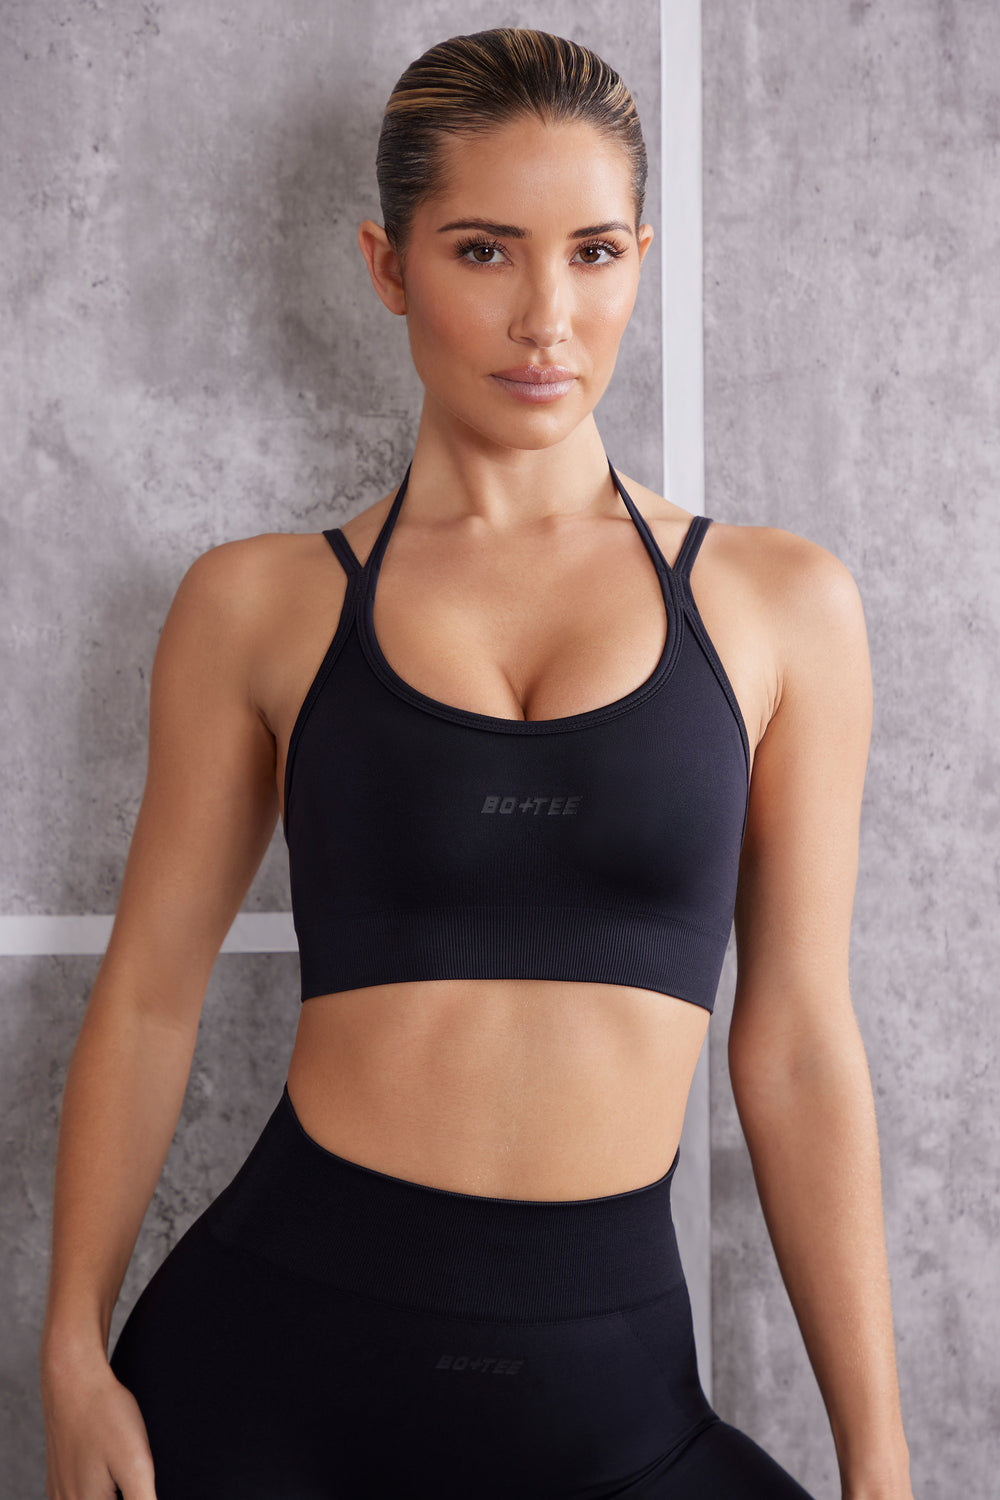 Bo+Tee Sports Bra Green - $12 (62% Off Retail) - From Wenli